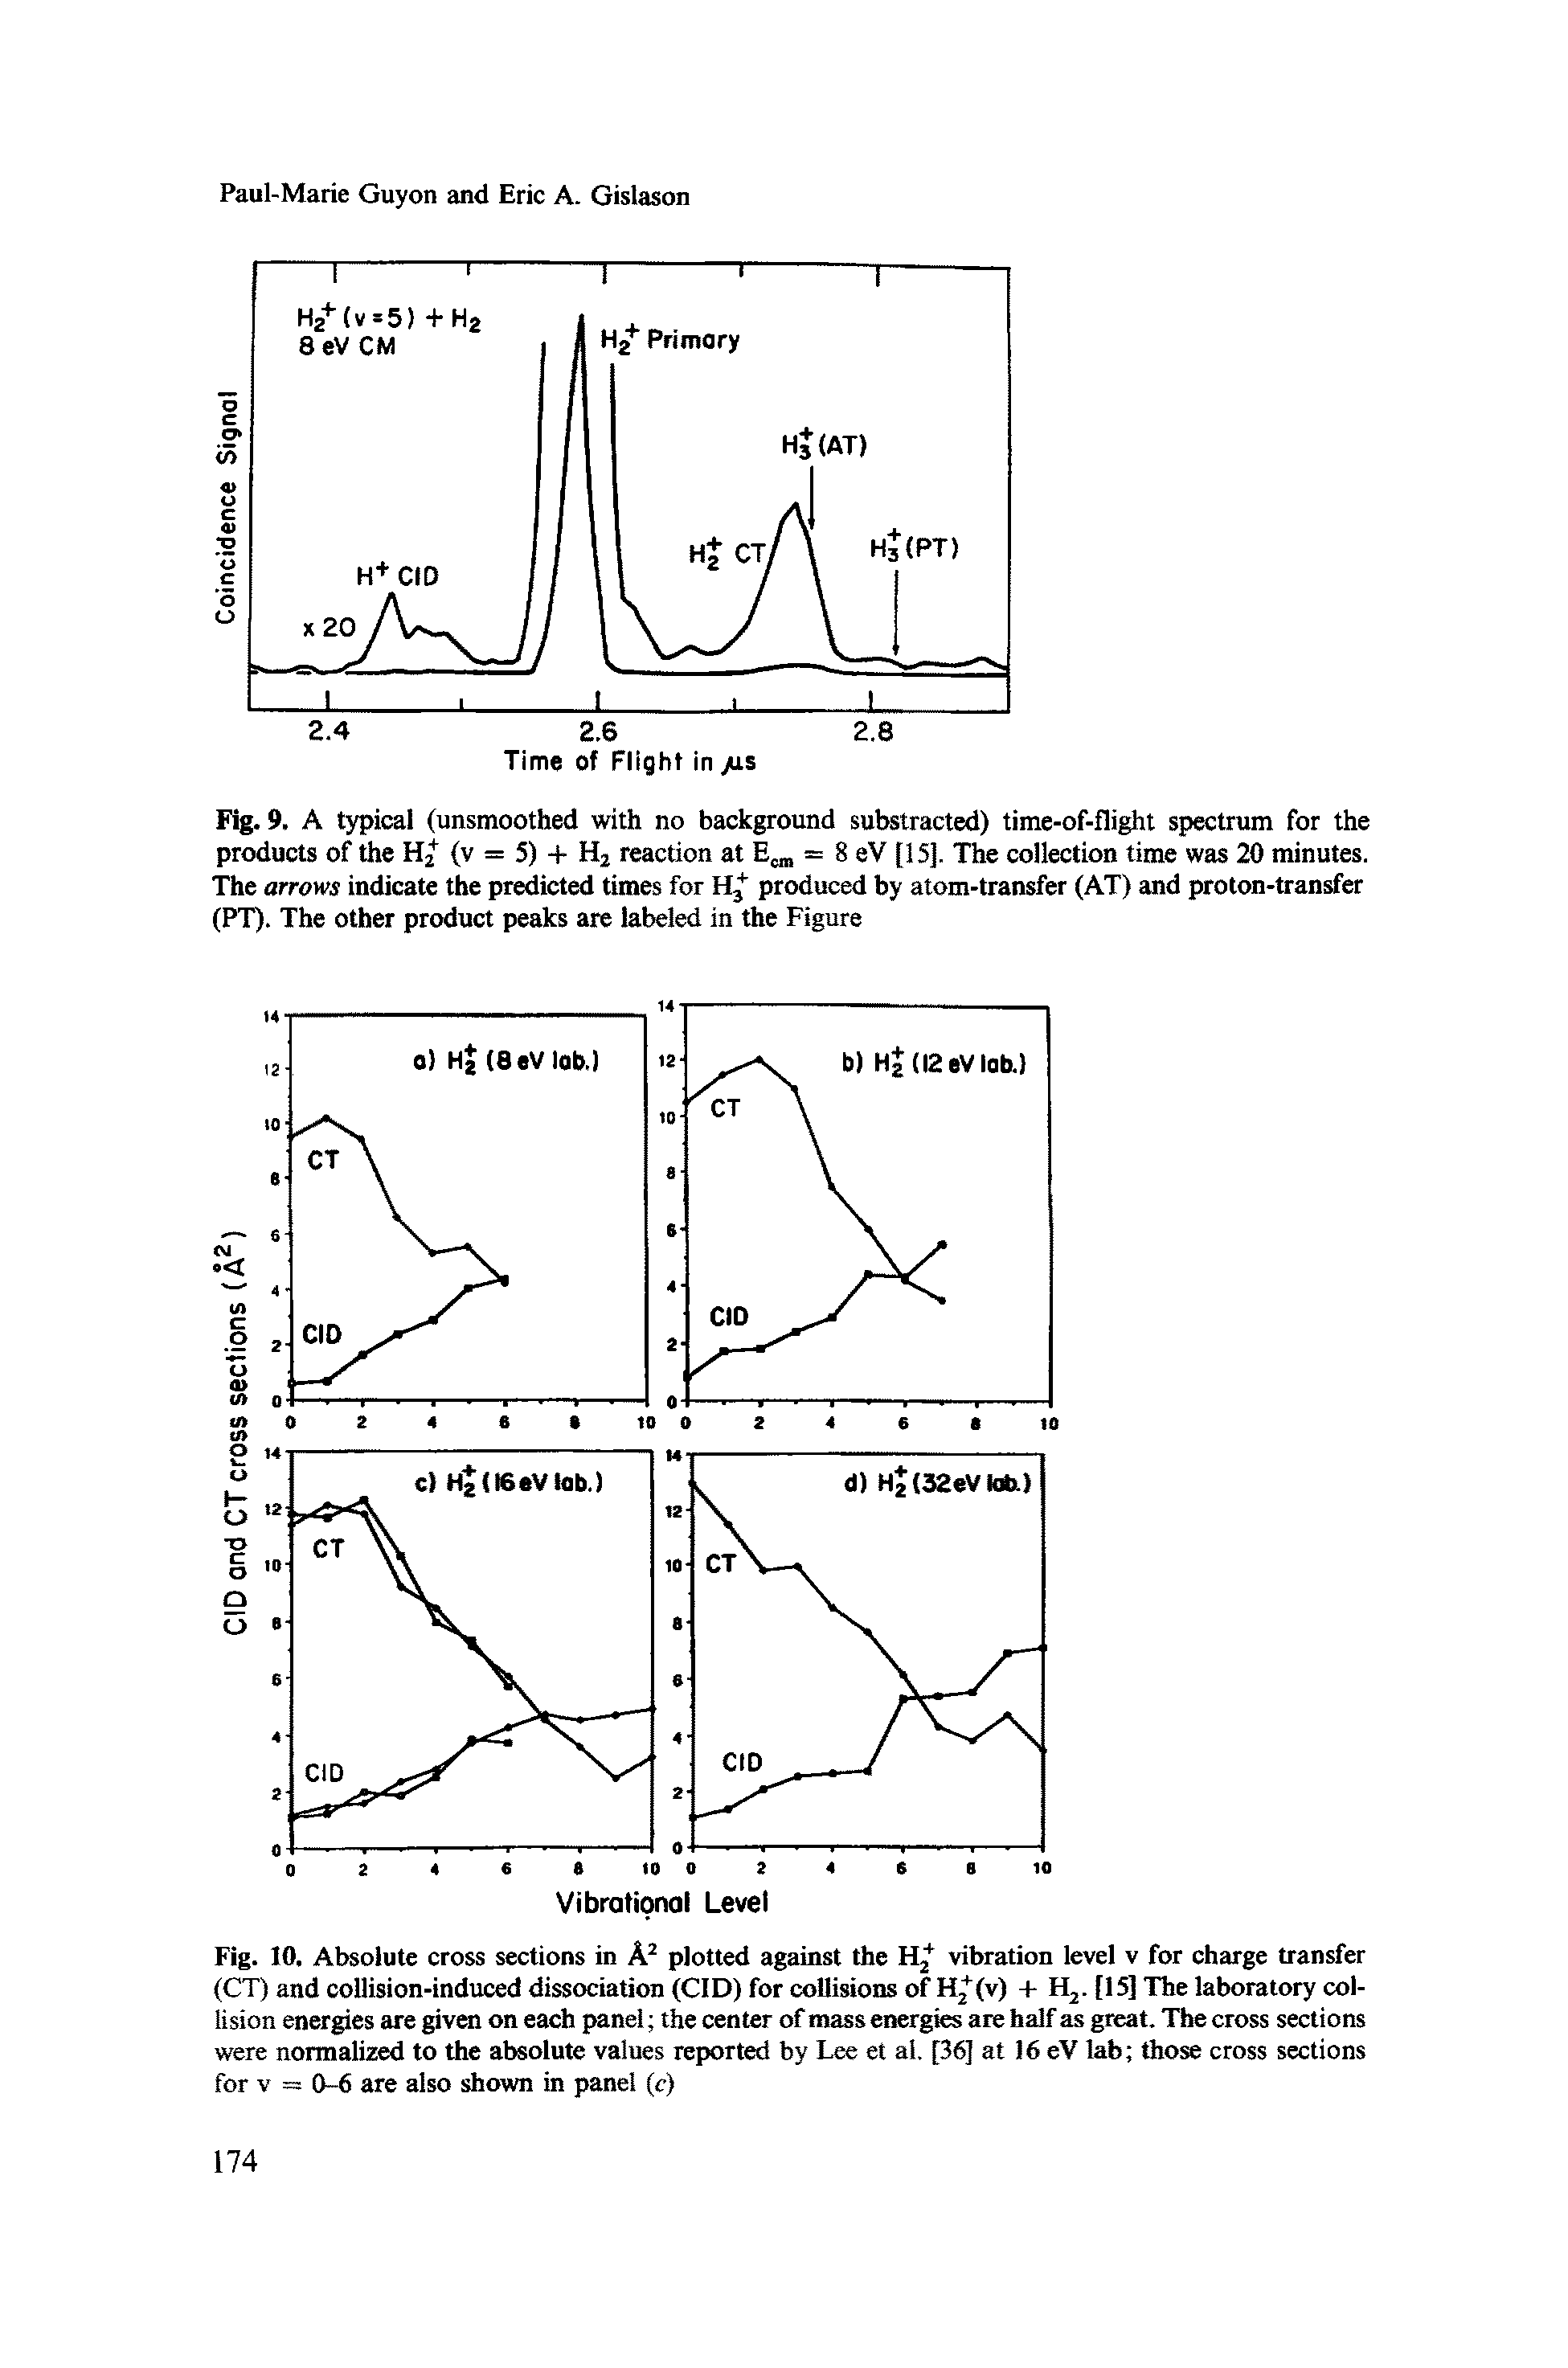 Fig. 10. Absolute cross sections in A2 plotted against the H2 vibration level v for charge transfer (CT) and collision-induced dissociation (CID) for collisions of H (v) + H2. [15] The laboratory collision energies are given on each panel the center of mass energies are half as great. The cross sections were normalized to the absolute values reported by Lee et al. [36] at 16 eV lab those cross sections for v = 0-6 are also shown in panel (c)...